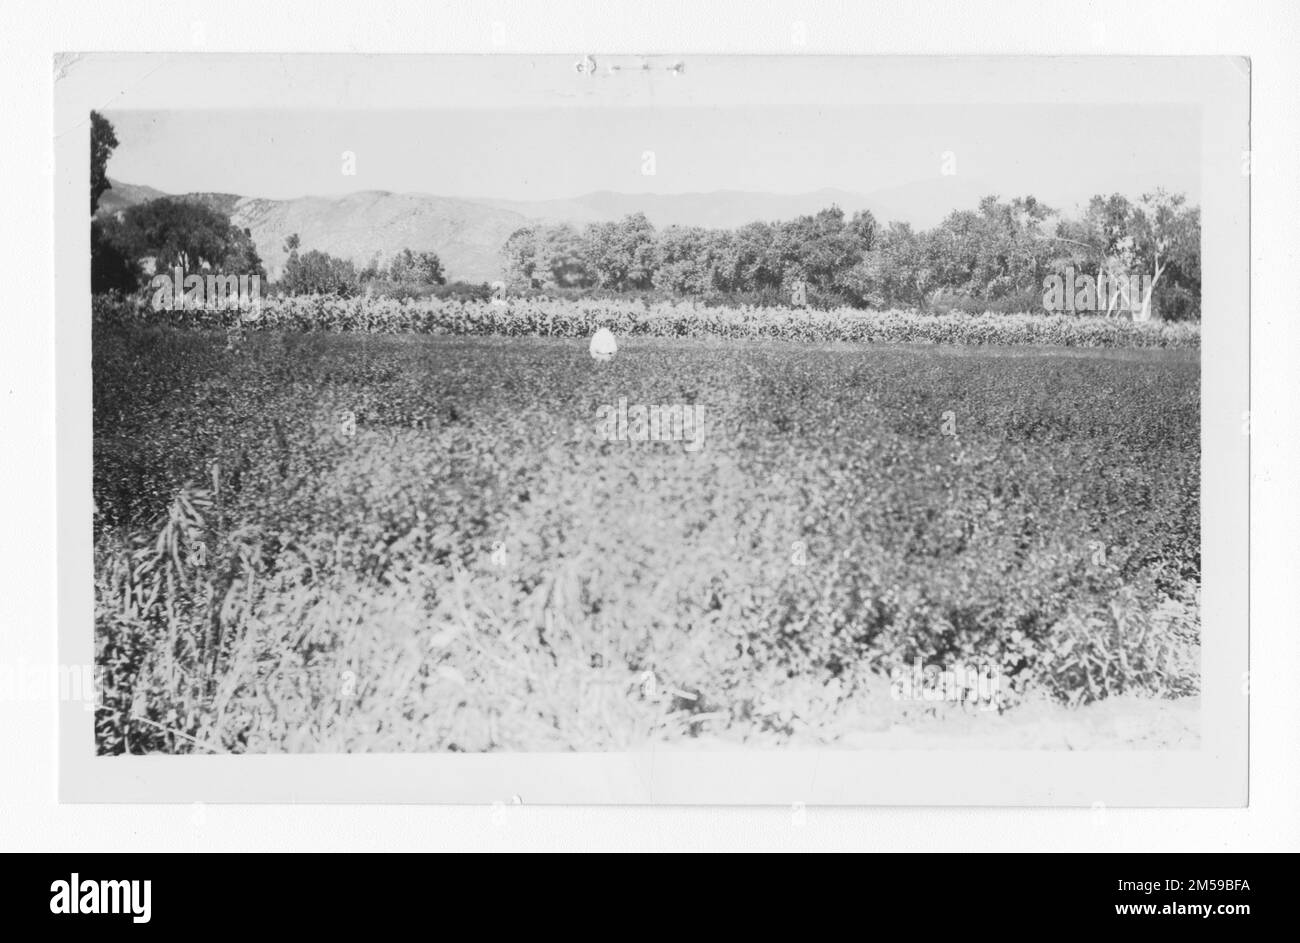 Original caption: '(Neg. Mr. Cooley) A diverse and productive farm at the Soboba Res. Alfalfa field in the foreground and corn field in the background.'. 1936 - 1942. Pacific Region (Riverside, CA). Photographic Print. Department of the Interior. Office of Indian Affairs. Mission Agency. 11/15/1920-6/17/1946. Photographs Stock Photo